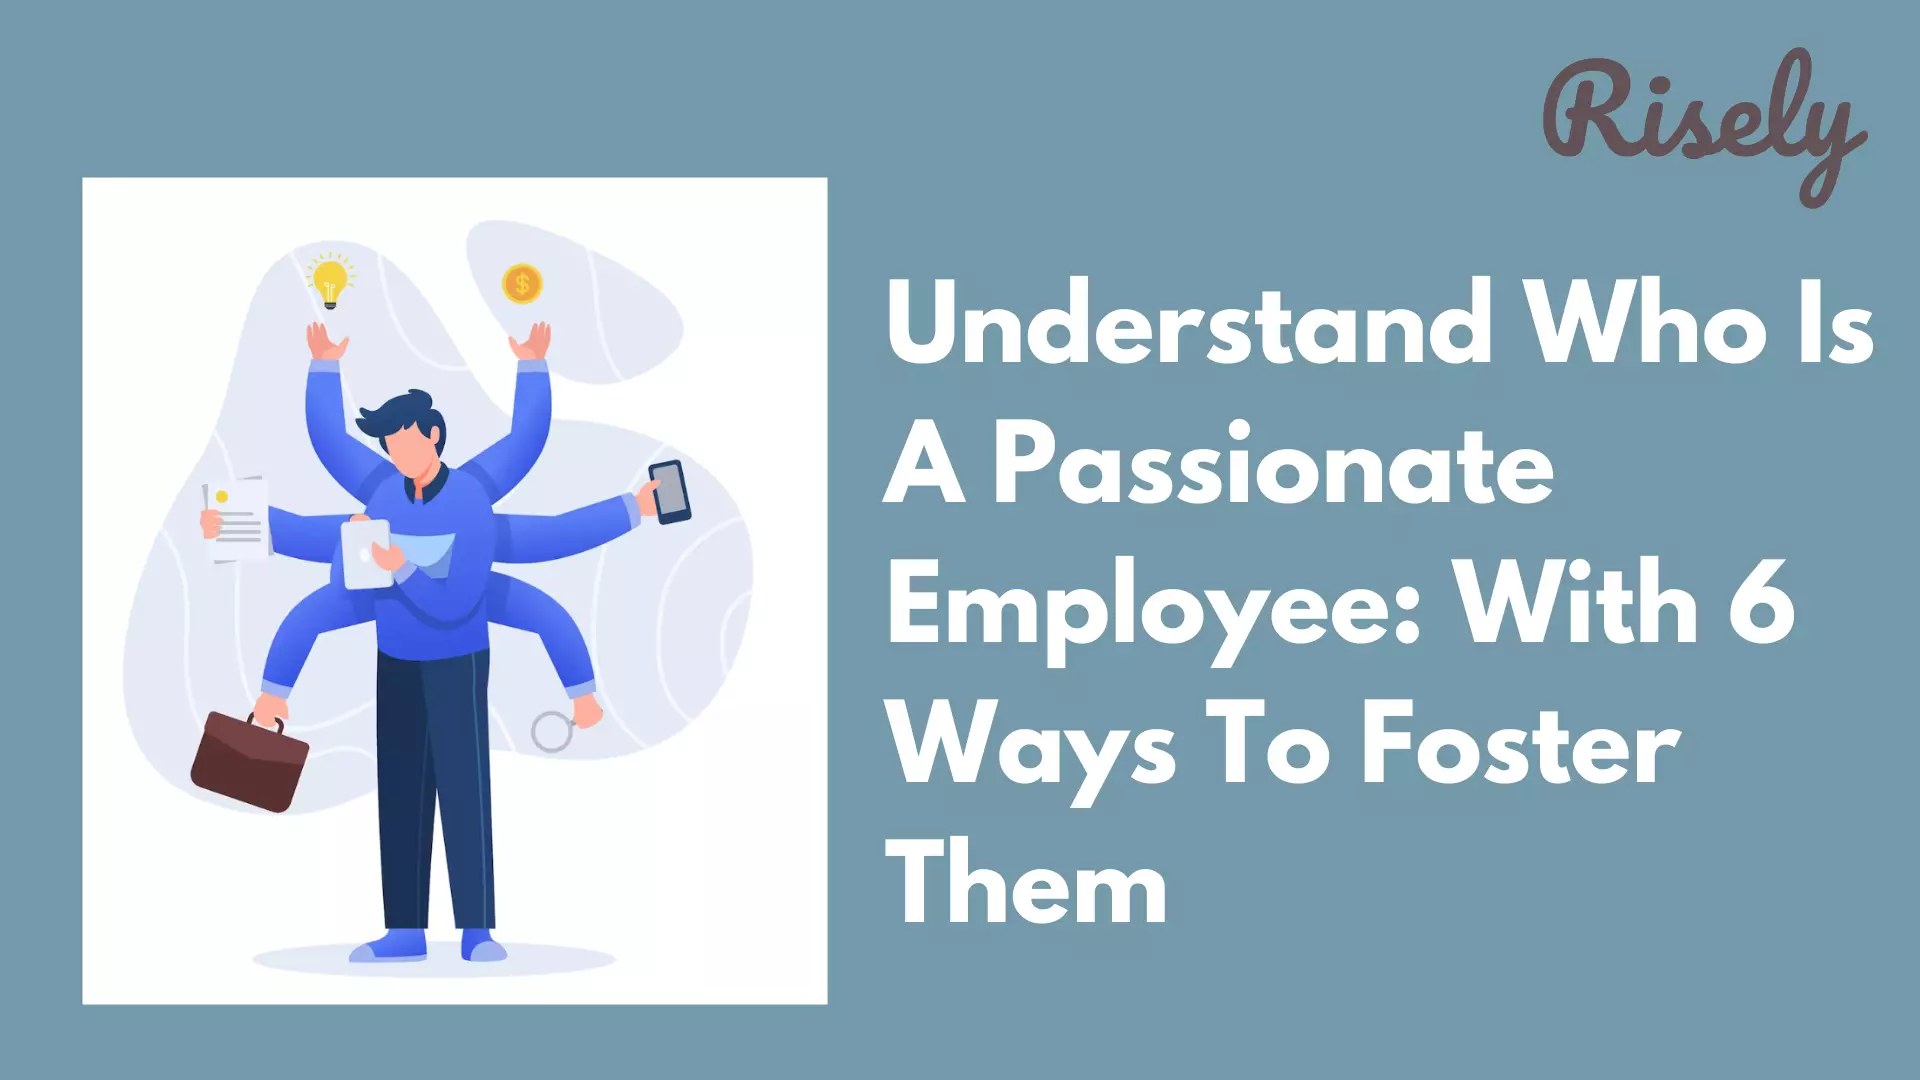 Understand Who Is A Passionate Employee: With 6 Ways To Foster Them